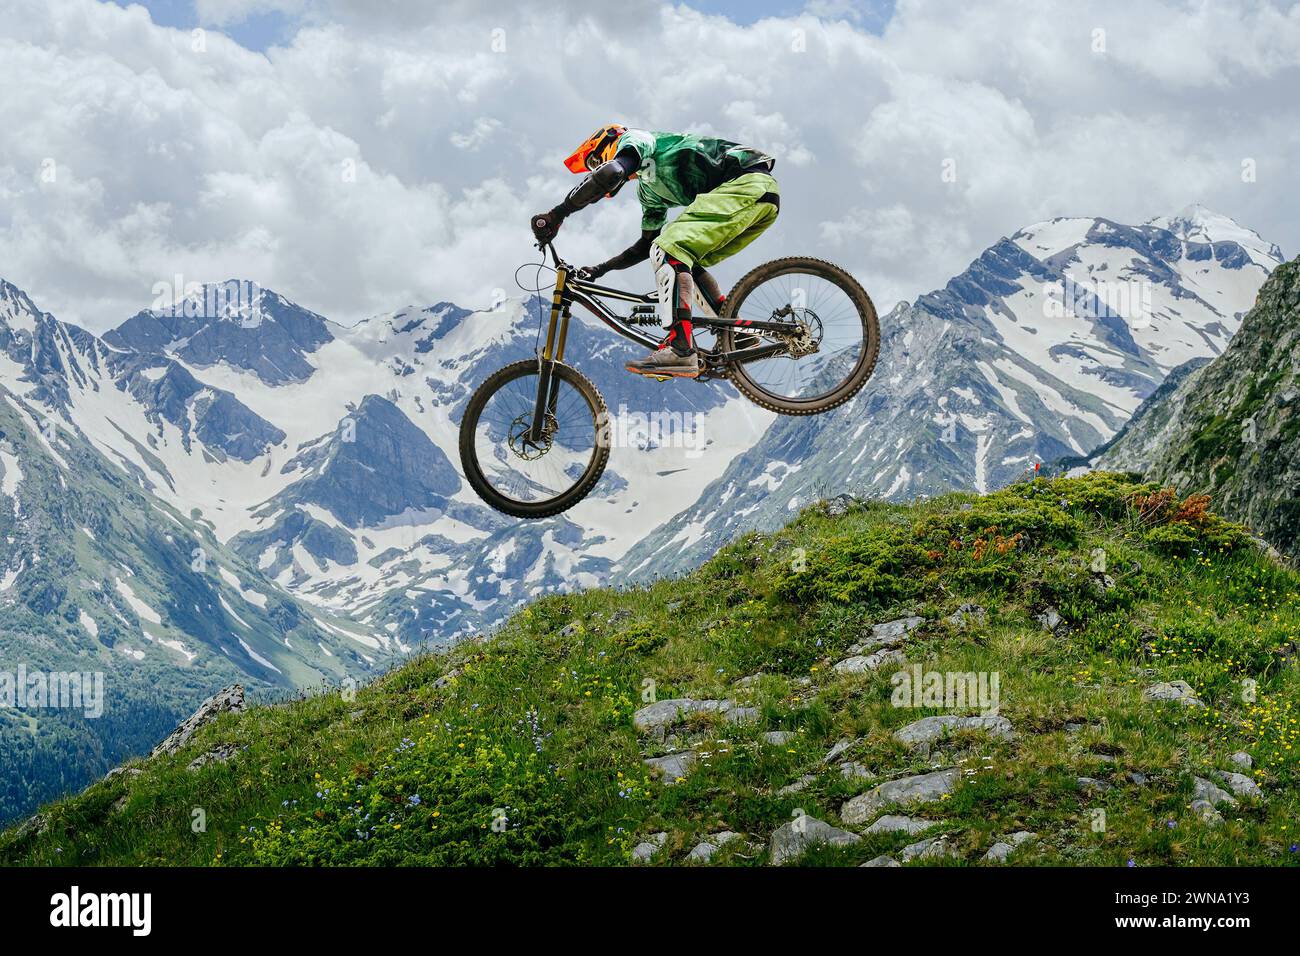 Mountain biker jumped, soaring mid-air against backdrop of snow-capped peaks and lush greenery. downhill competition Stock Photo